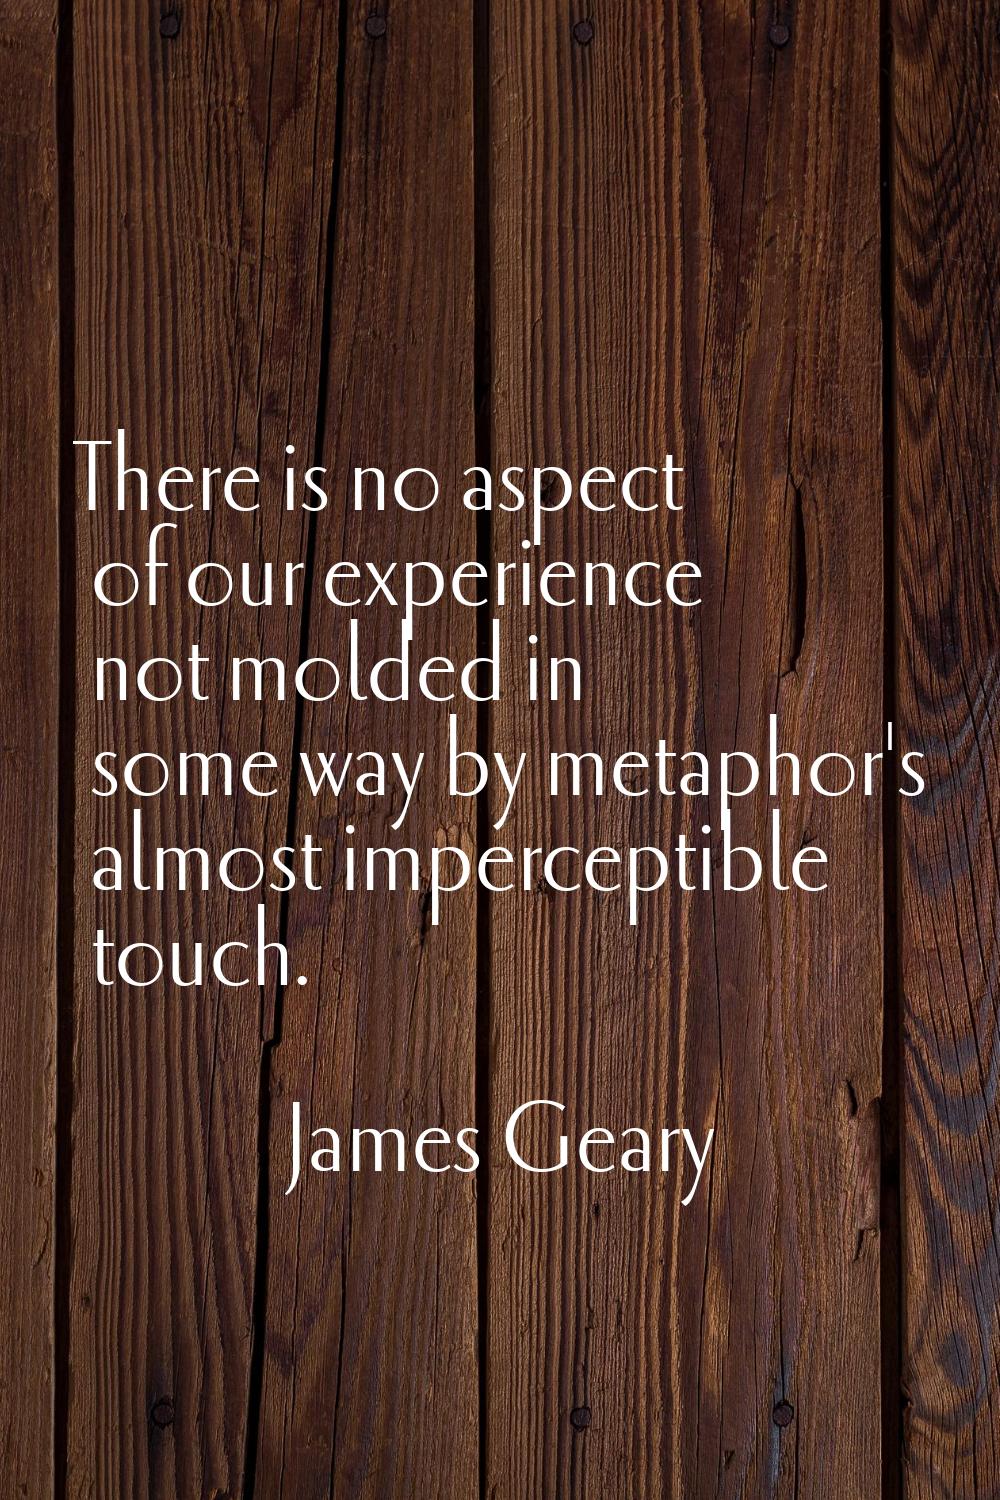 There is no aspect of our experience not molded in some way by metaphor's almost imperceptible touc